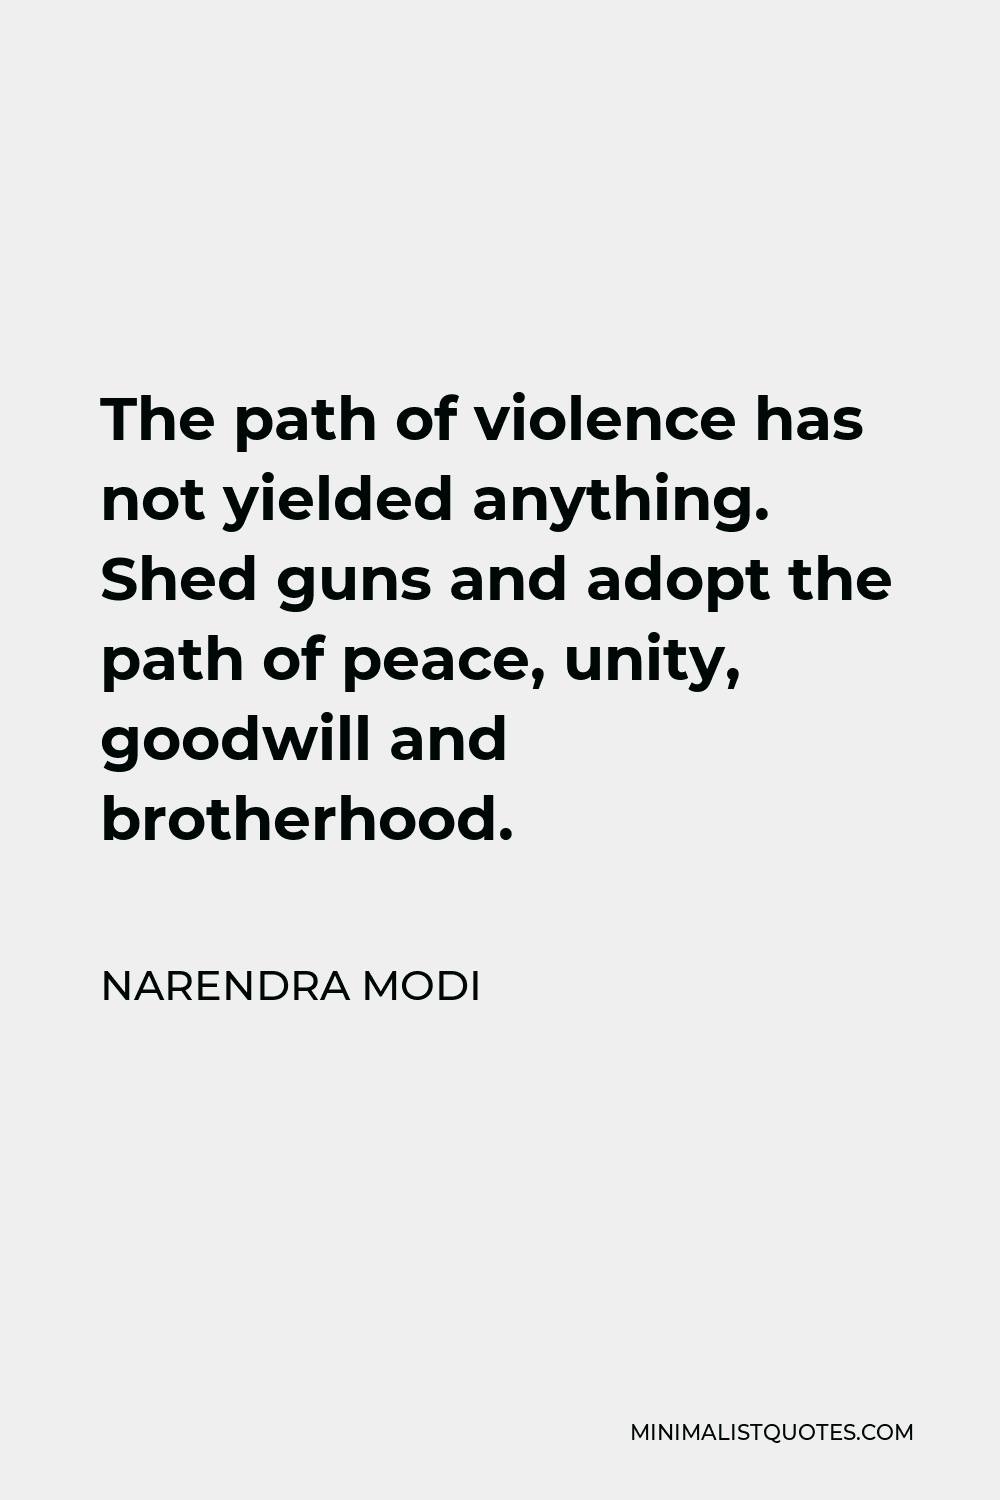 Narendra Modi Quote - The path of violence has not yielded anything. Shed guns and adopt the path of peace, unity, goodwill and brotherhood.